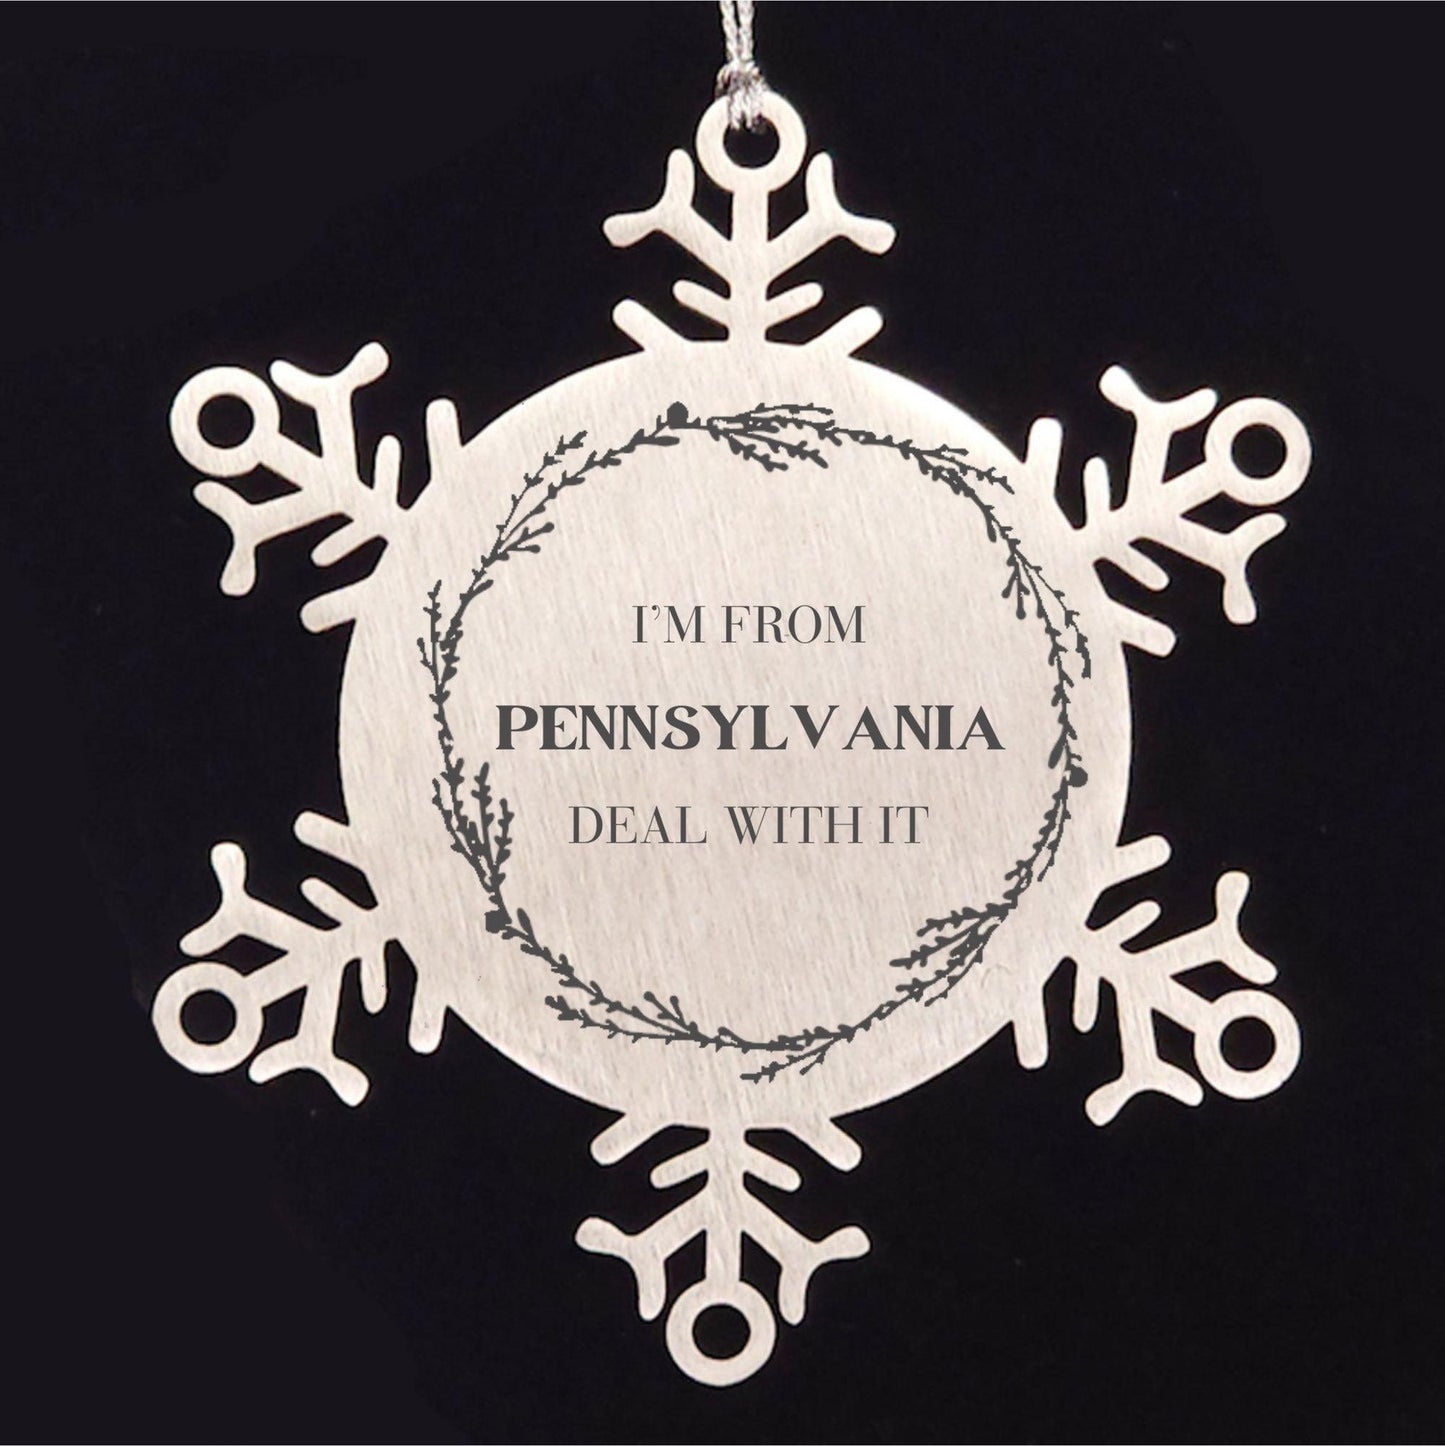 I'm from Pennsylvania, Deal with it, Proud Pennsylvania State Ornament Gifts, Pennsylvania Snowflake Ornament Gift Idea, Christmas Gifts for Pennsylvania People, Coworkers, Colleague - Mallard Moon Gift Shop